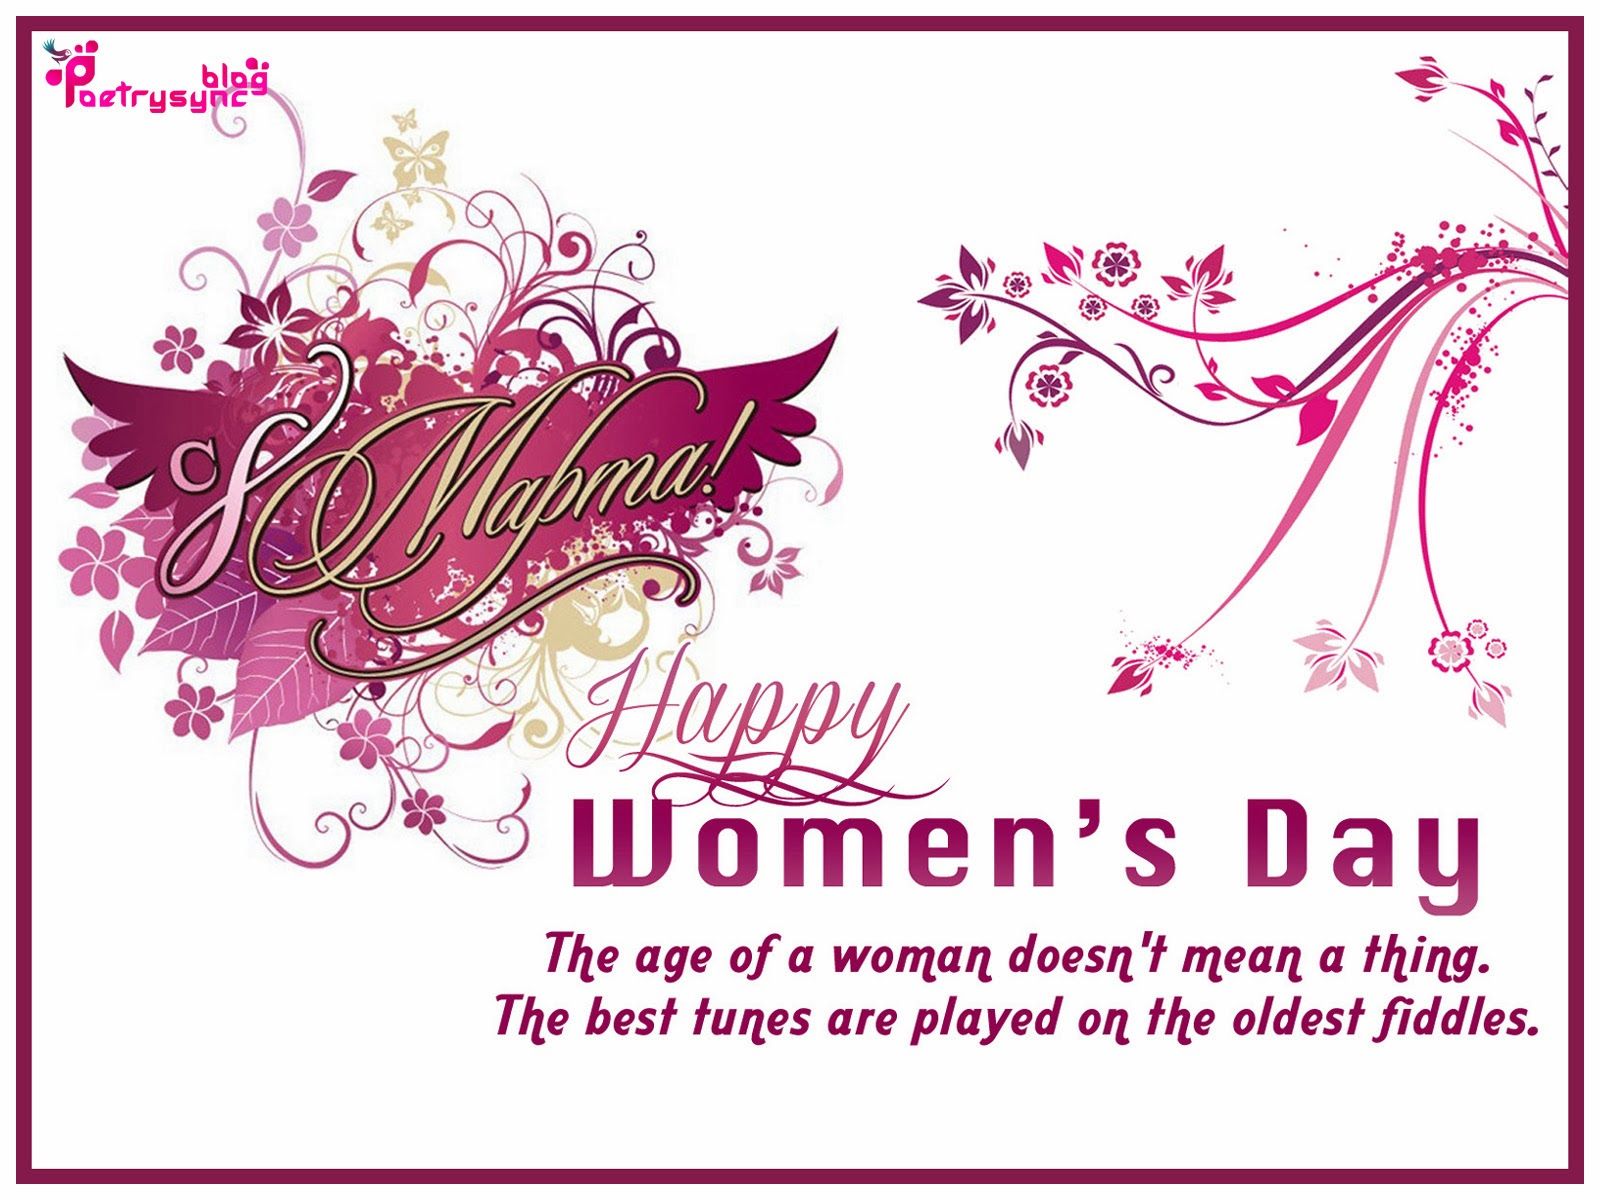 Holidays International Woman S Day Download Wallpaper